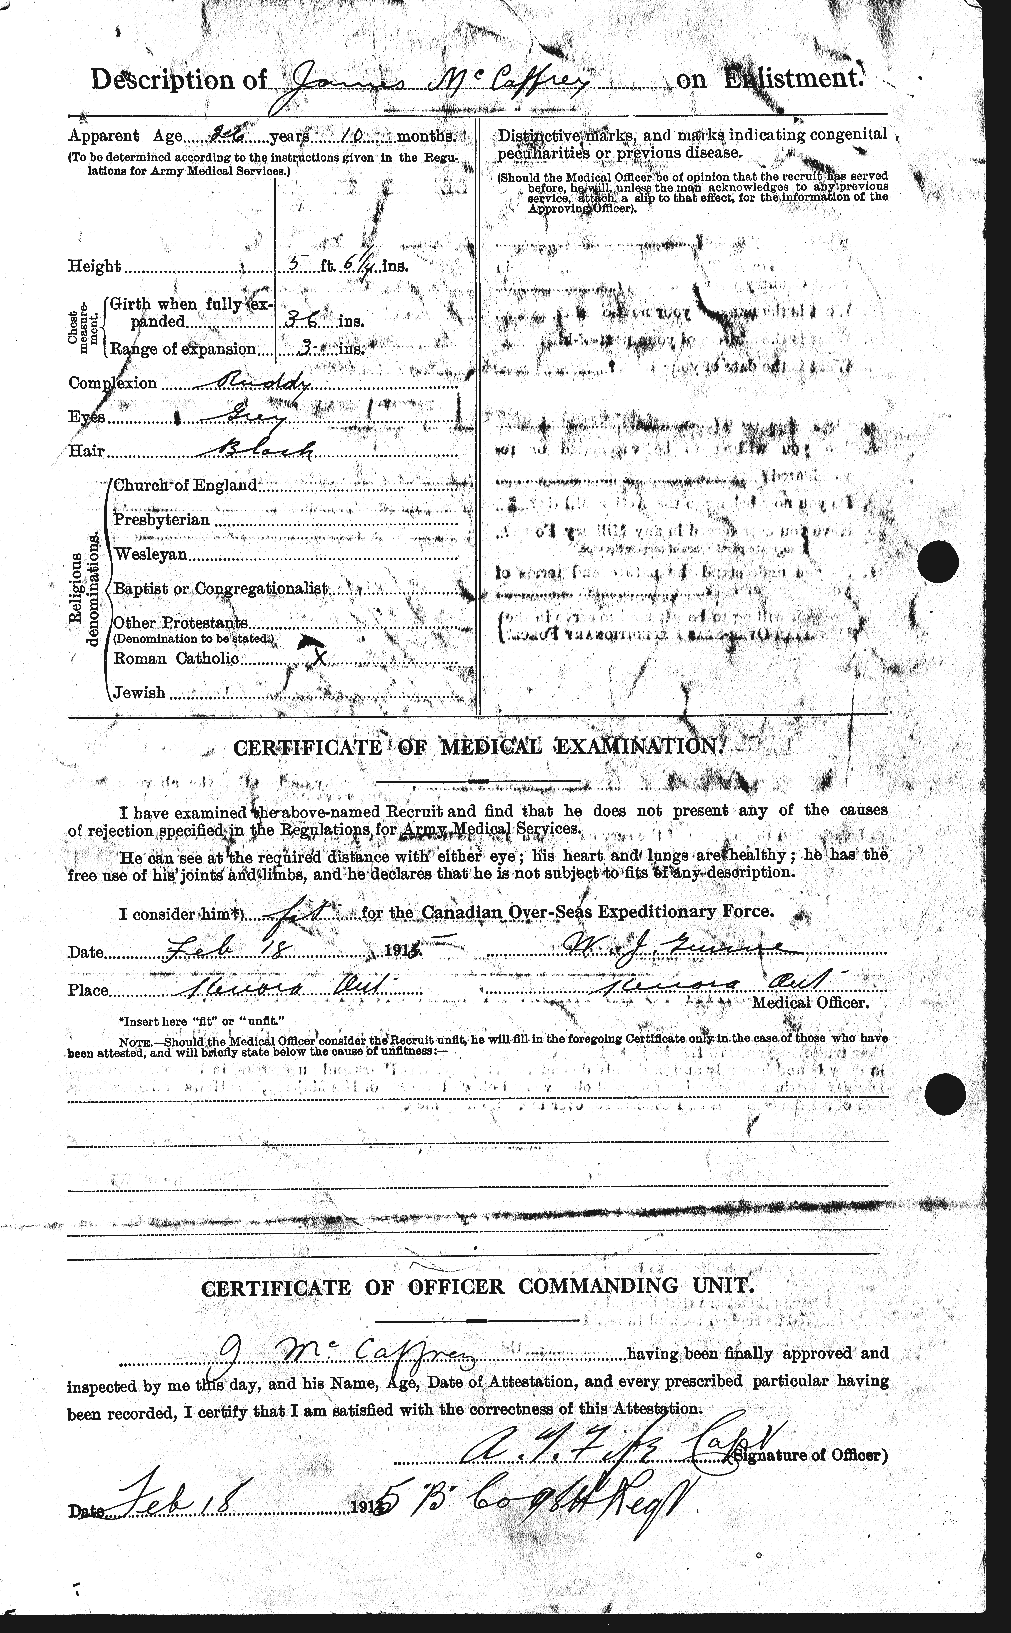 Personnel Records of the First World War - CEF 130916b